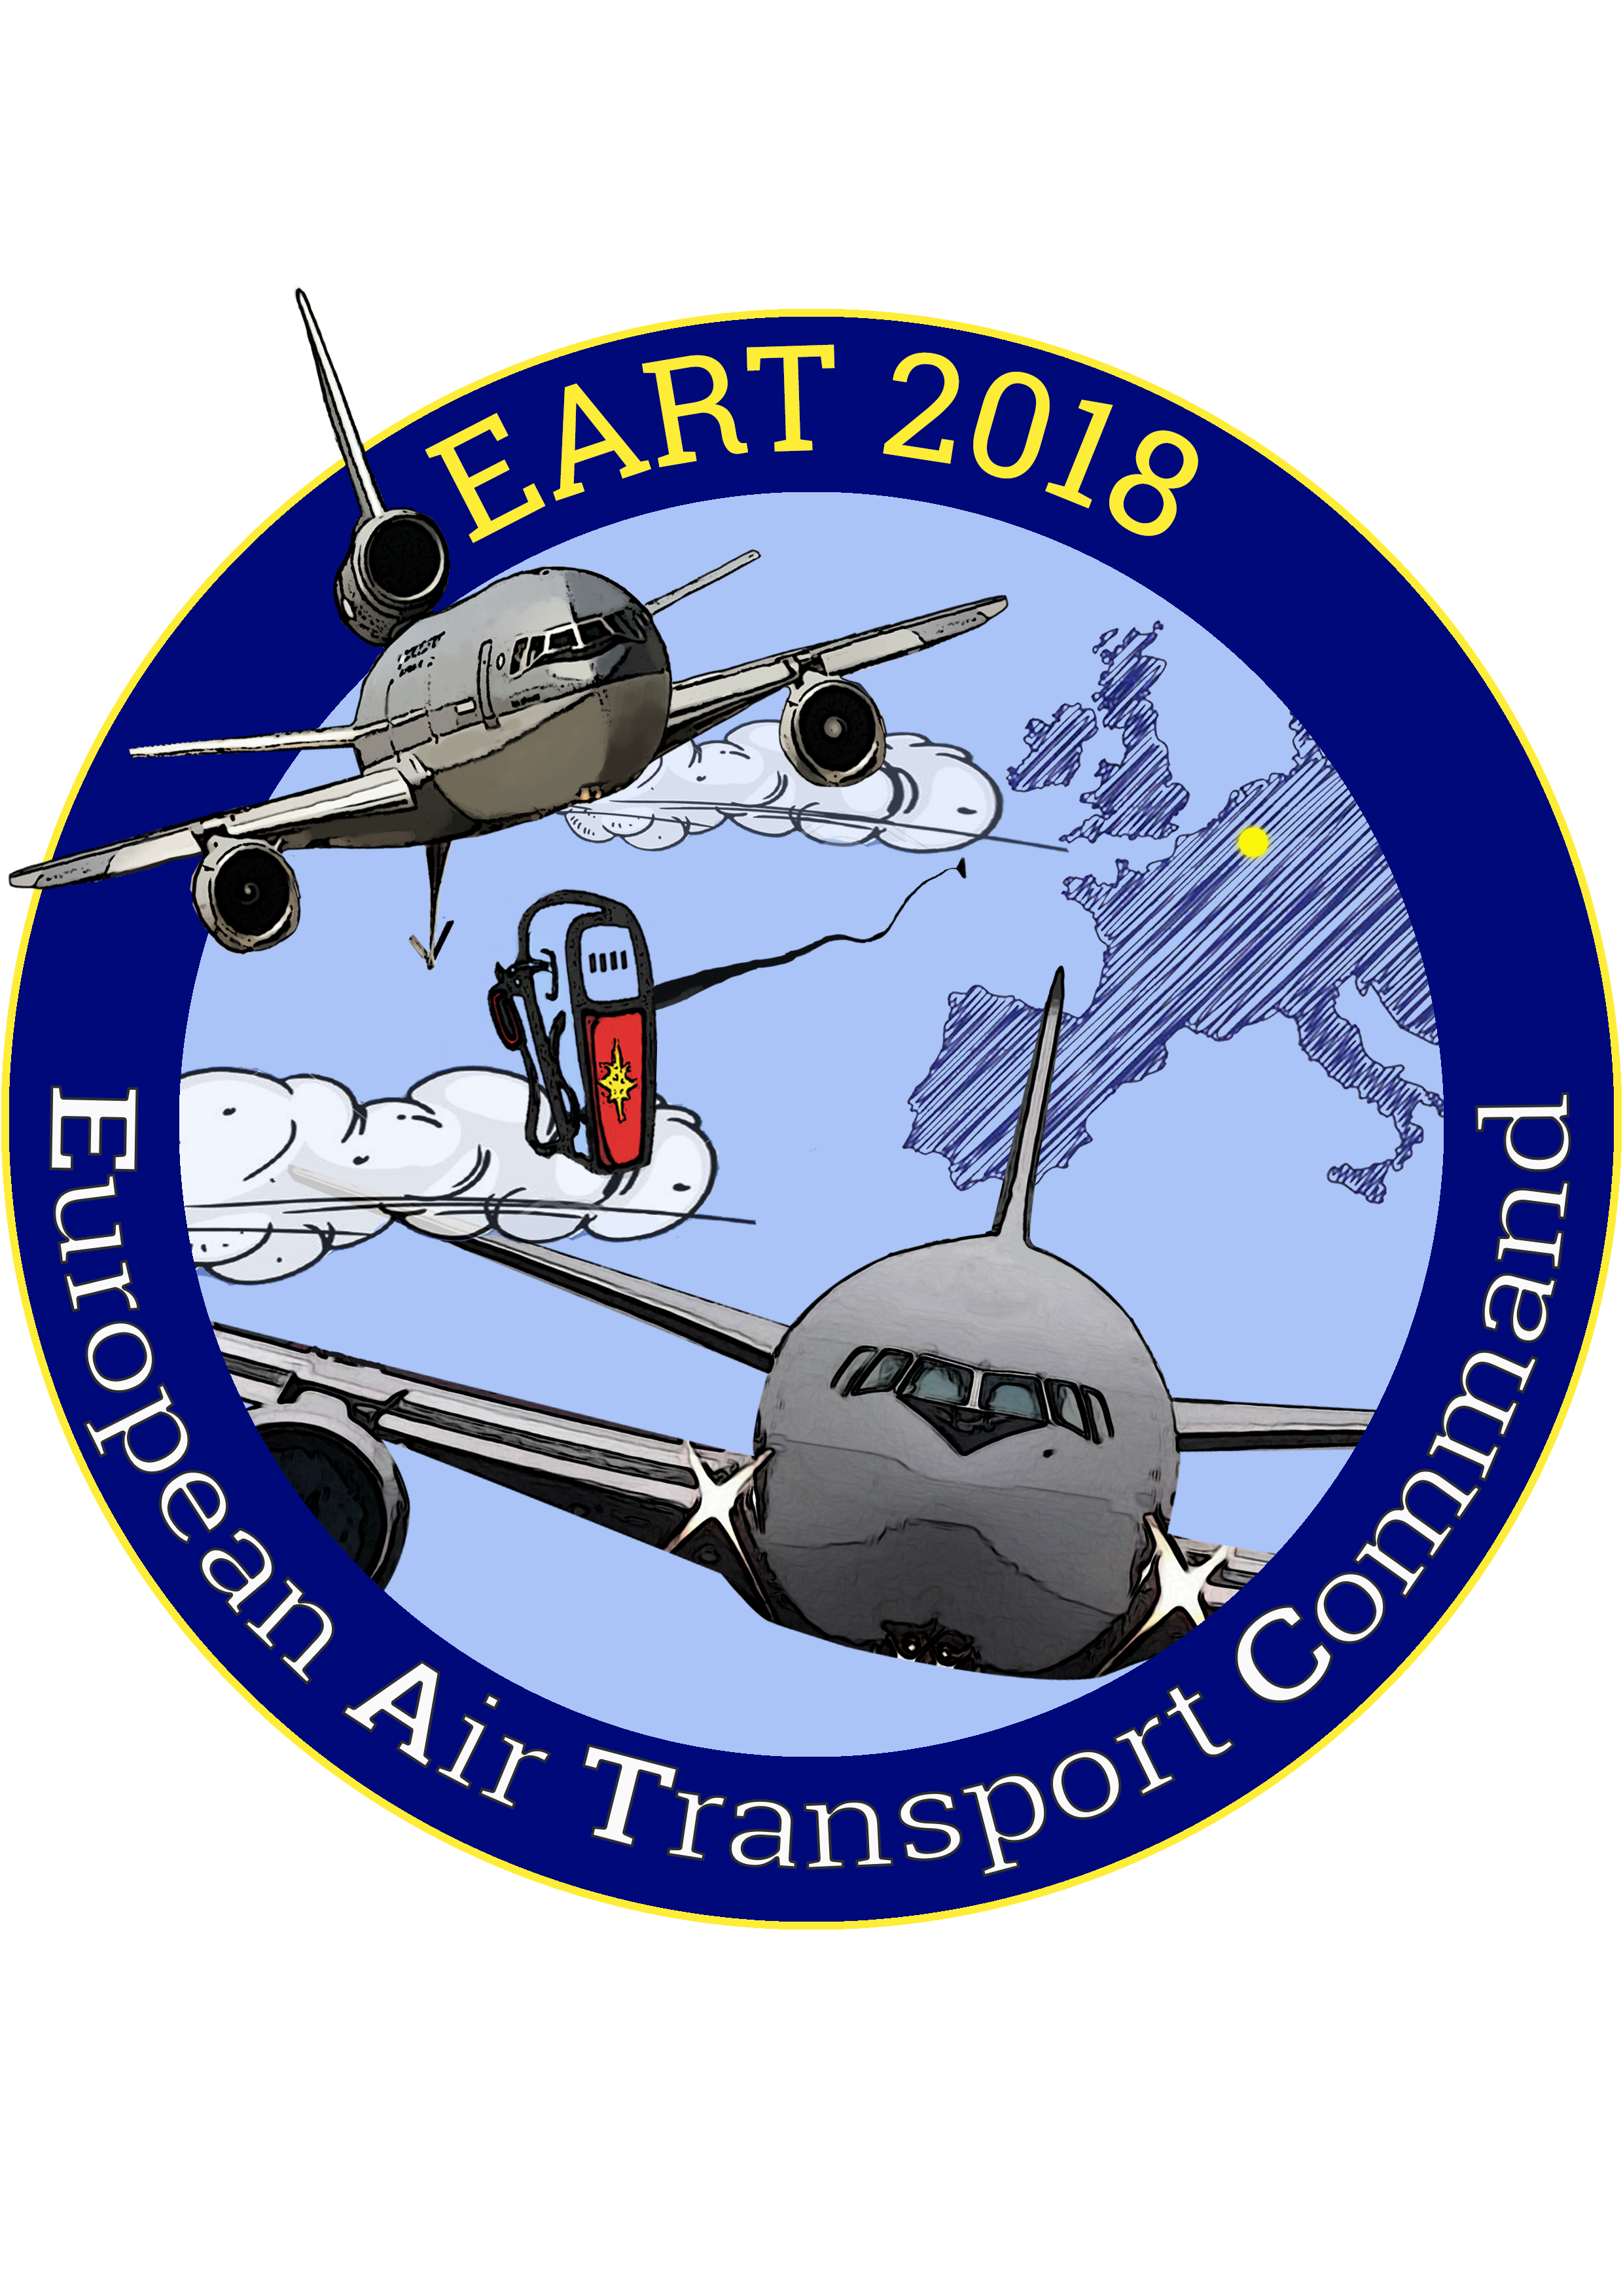 EART 2018 will be launched soon